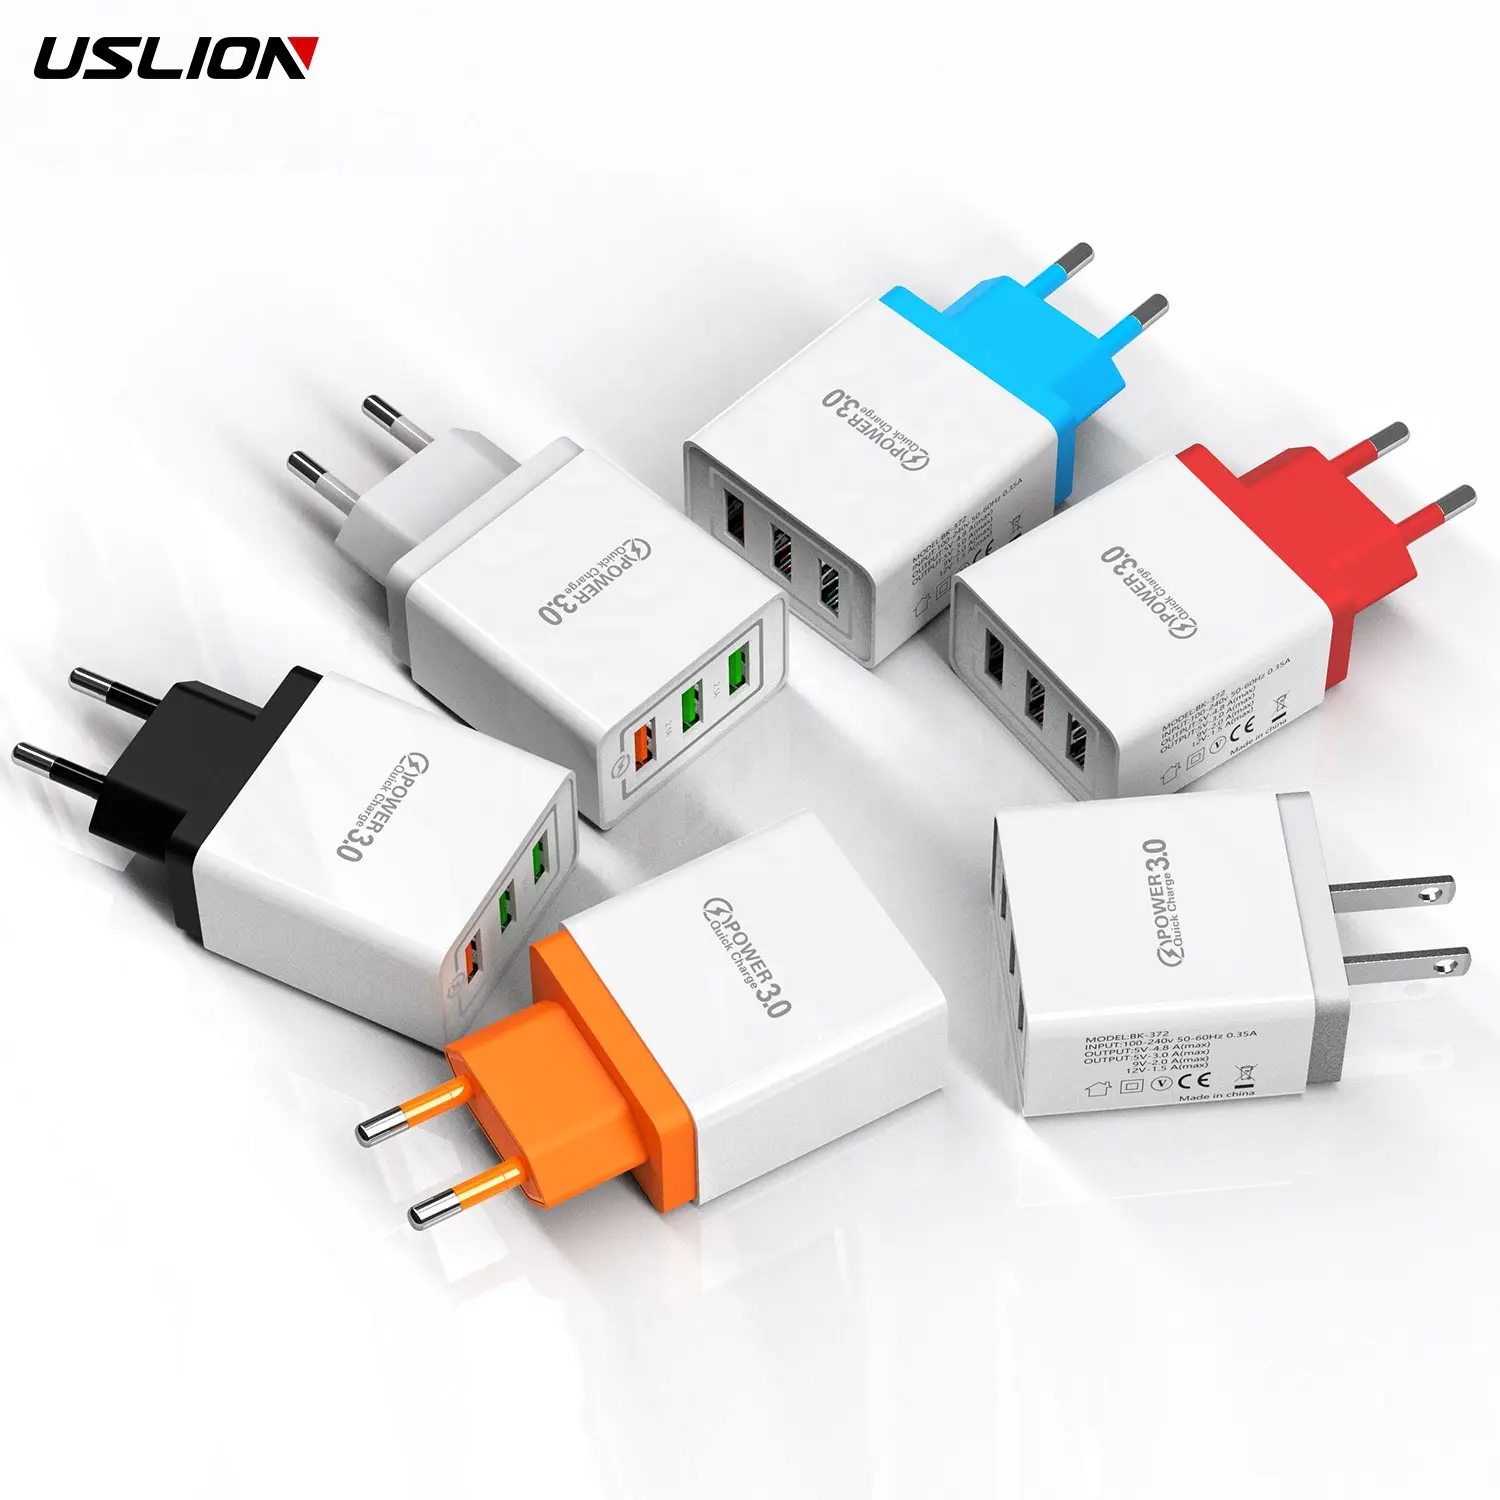 USLION Wall USB Charger Adapter EU US Plug Fast Charging Adapter for Huawei OTG Mobile Phone Charger Adapter